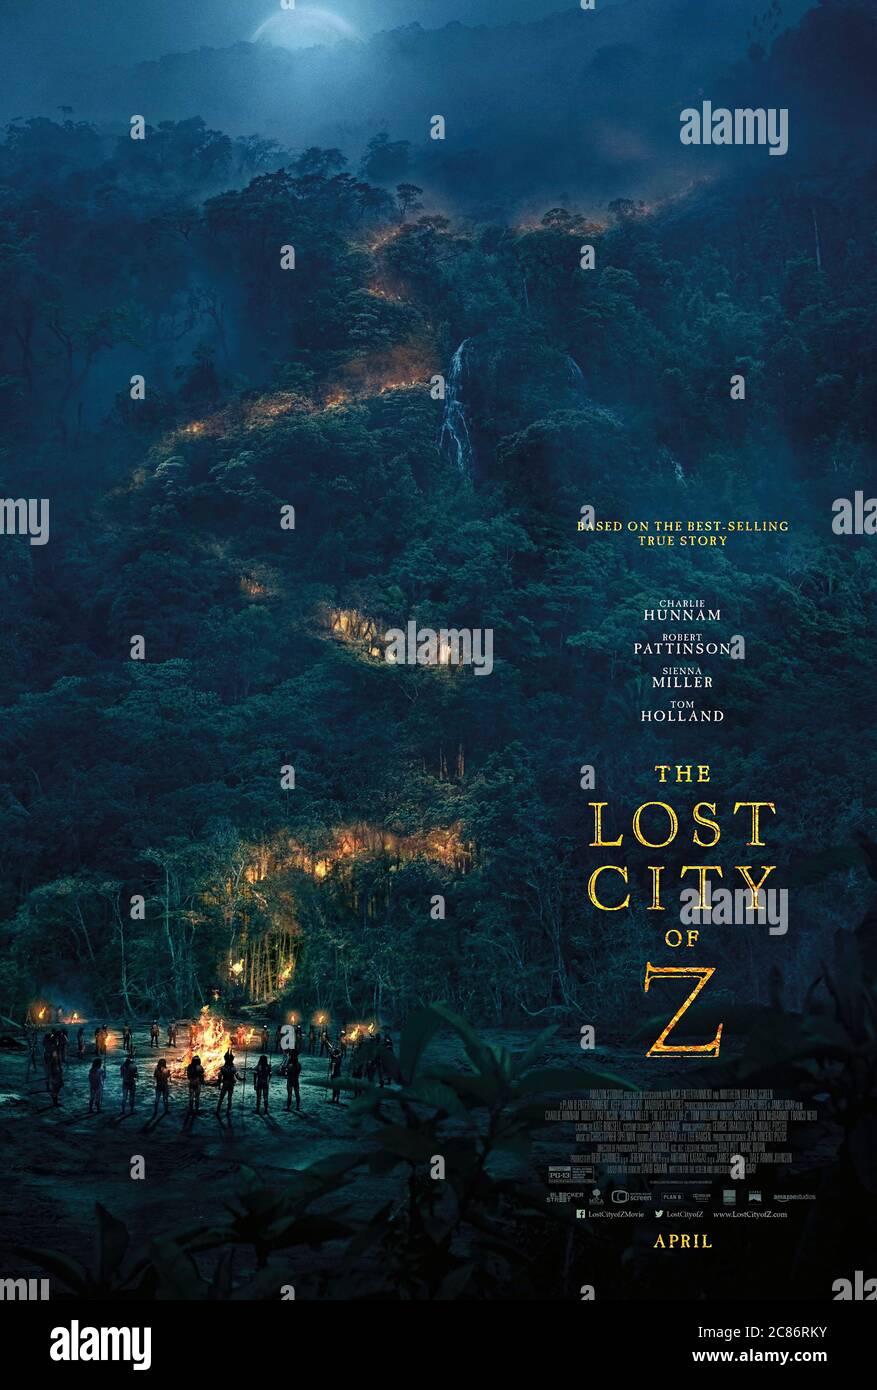 The Lost City of Z (2016) directed by James Gray and starring Charlie Hunnam, Robert Pattinson, Sienna Miller and Tom Holland. True story of British explorer Percy Fawcett who disappeared in 1925 during an expedition to find Z, his name for an ancient lost city in the jungles of Brazil. Stock Photo